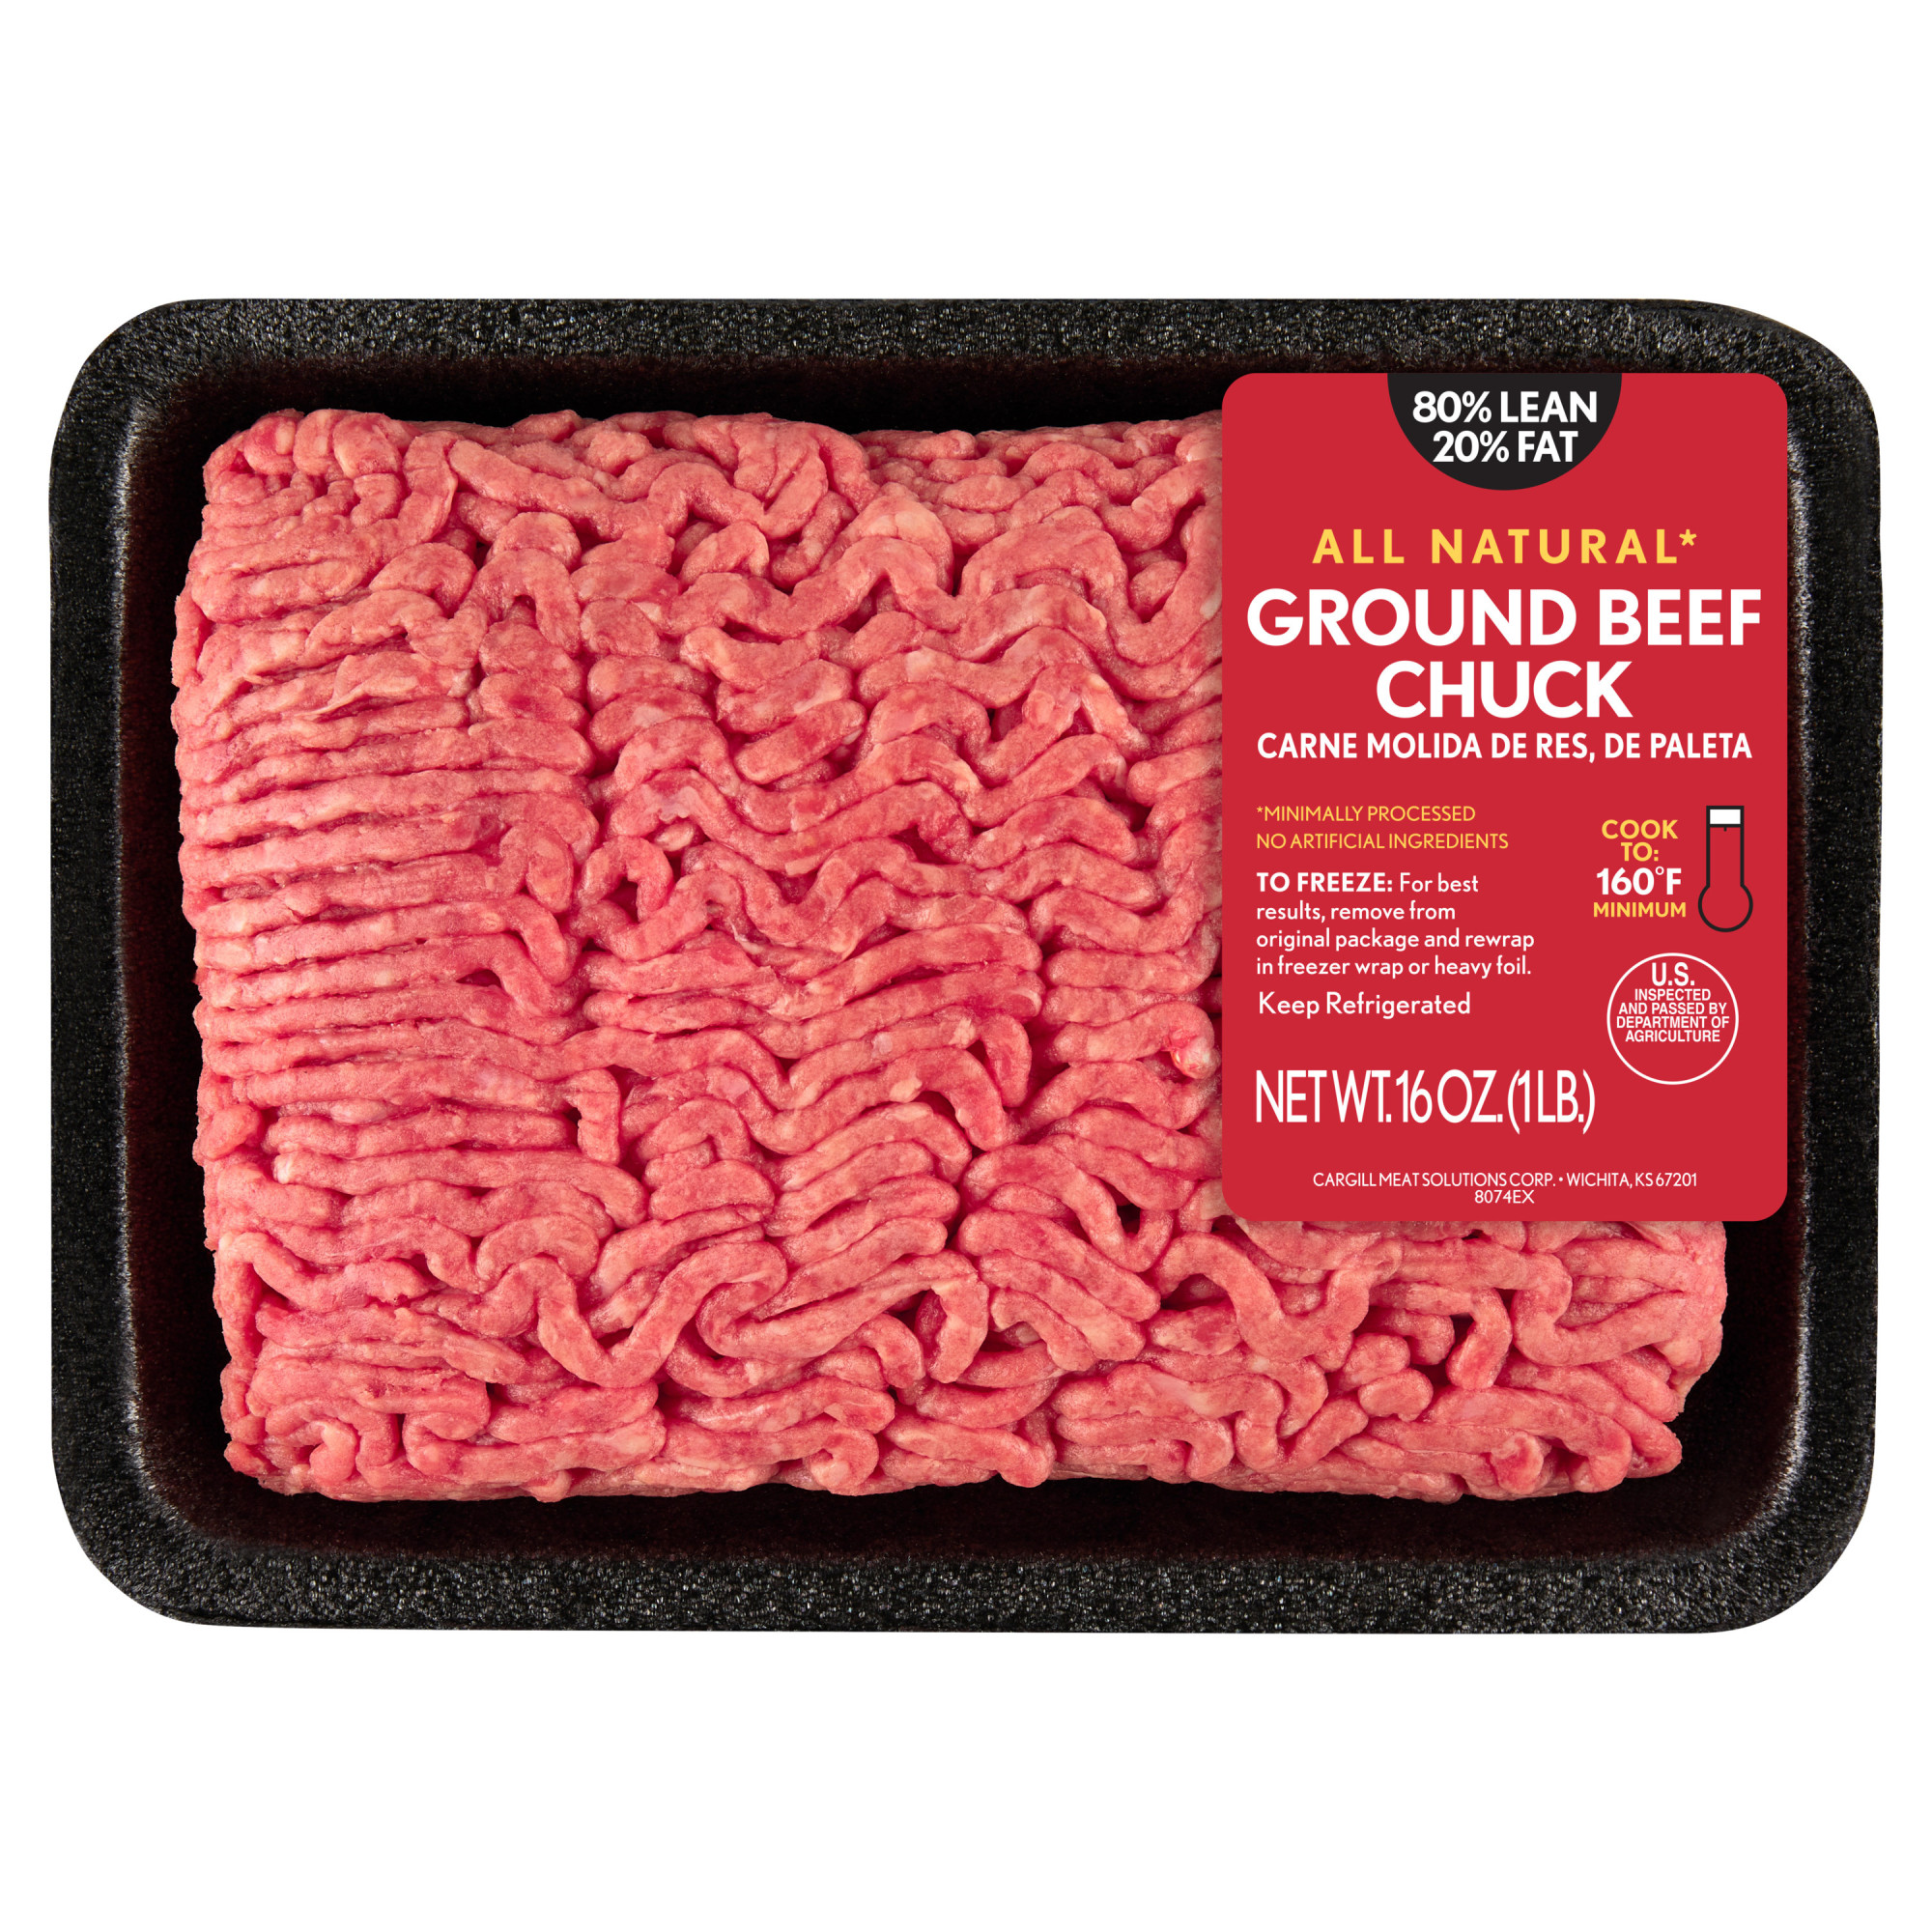 All Natural* 80% Lean/20% Fat Ground Beef Chuck, 1 lb Tray - image 1 of 8